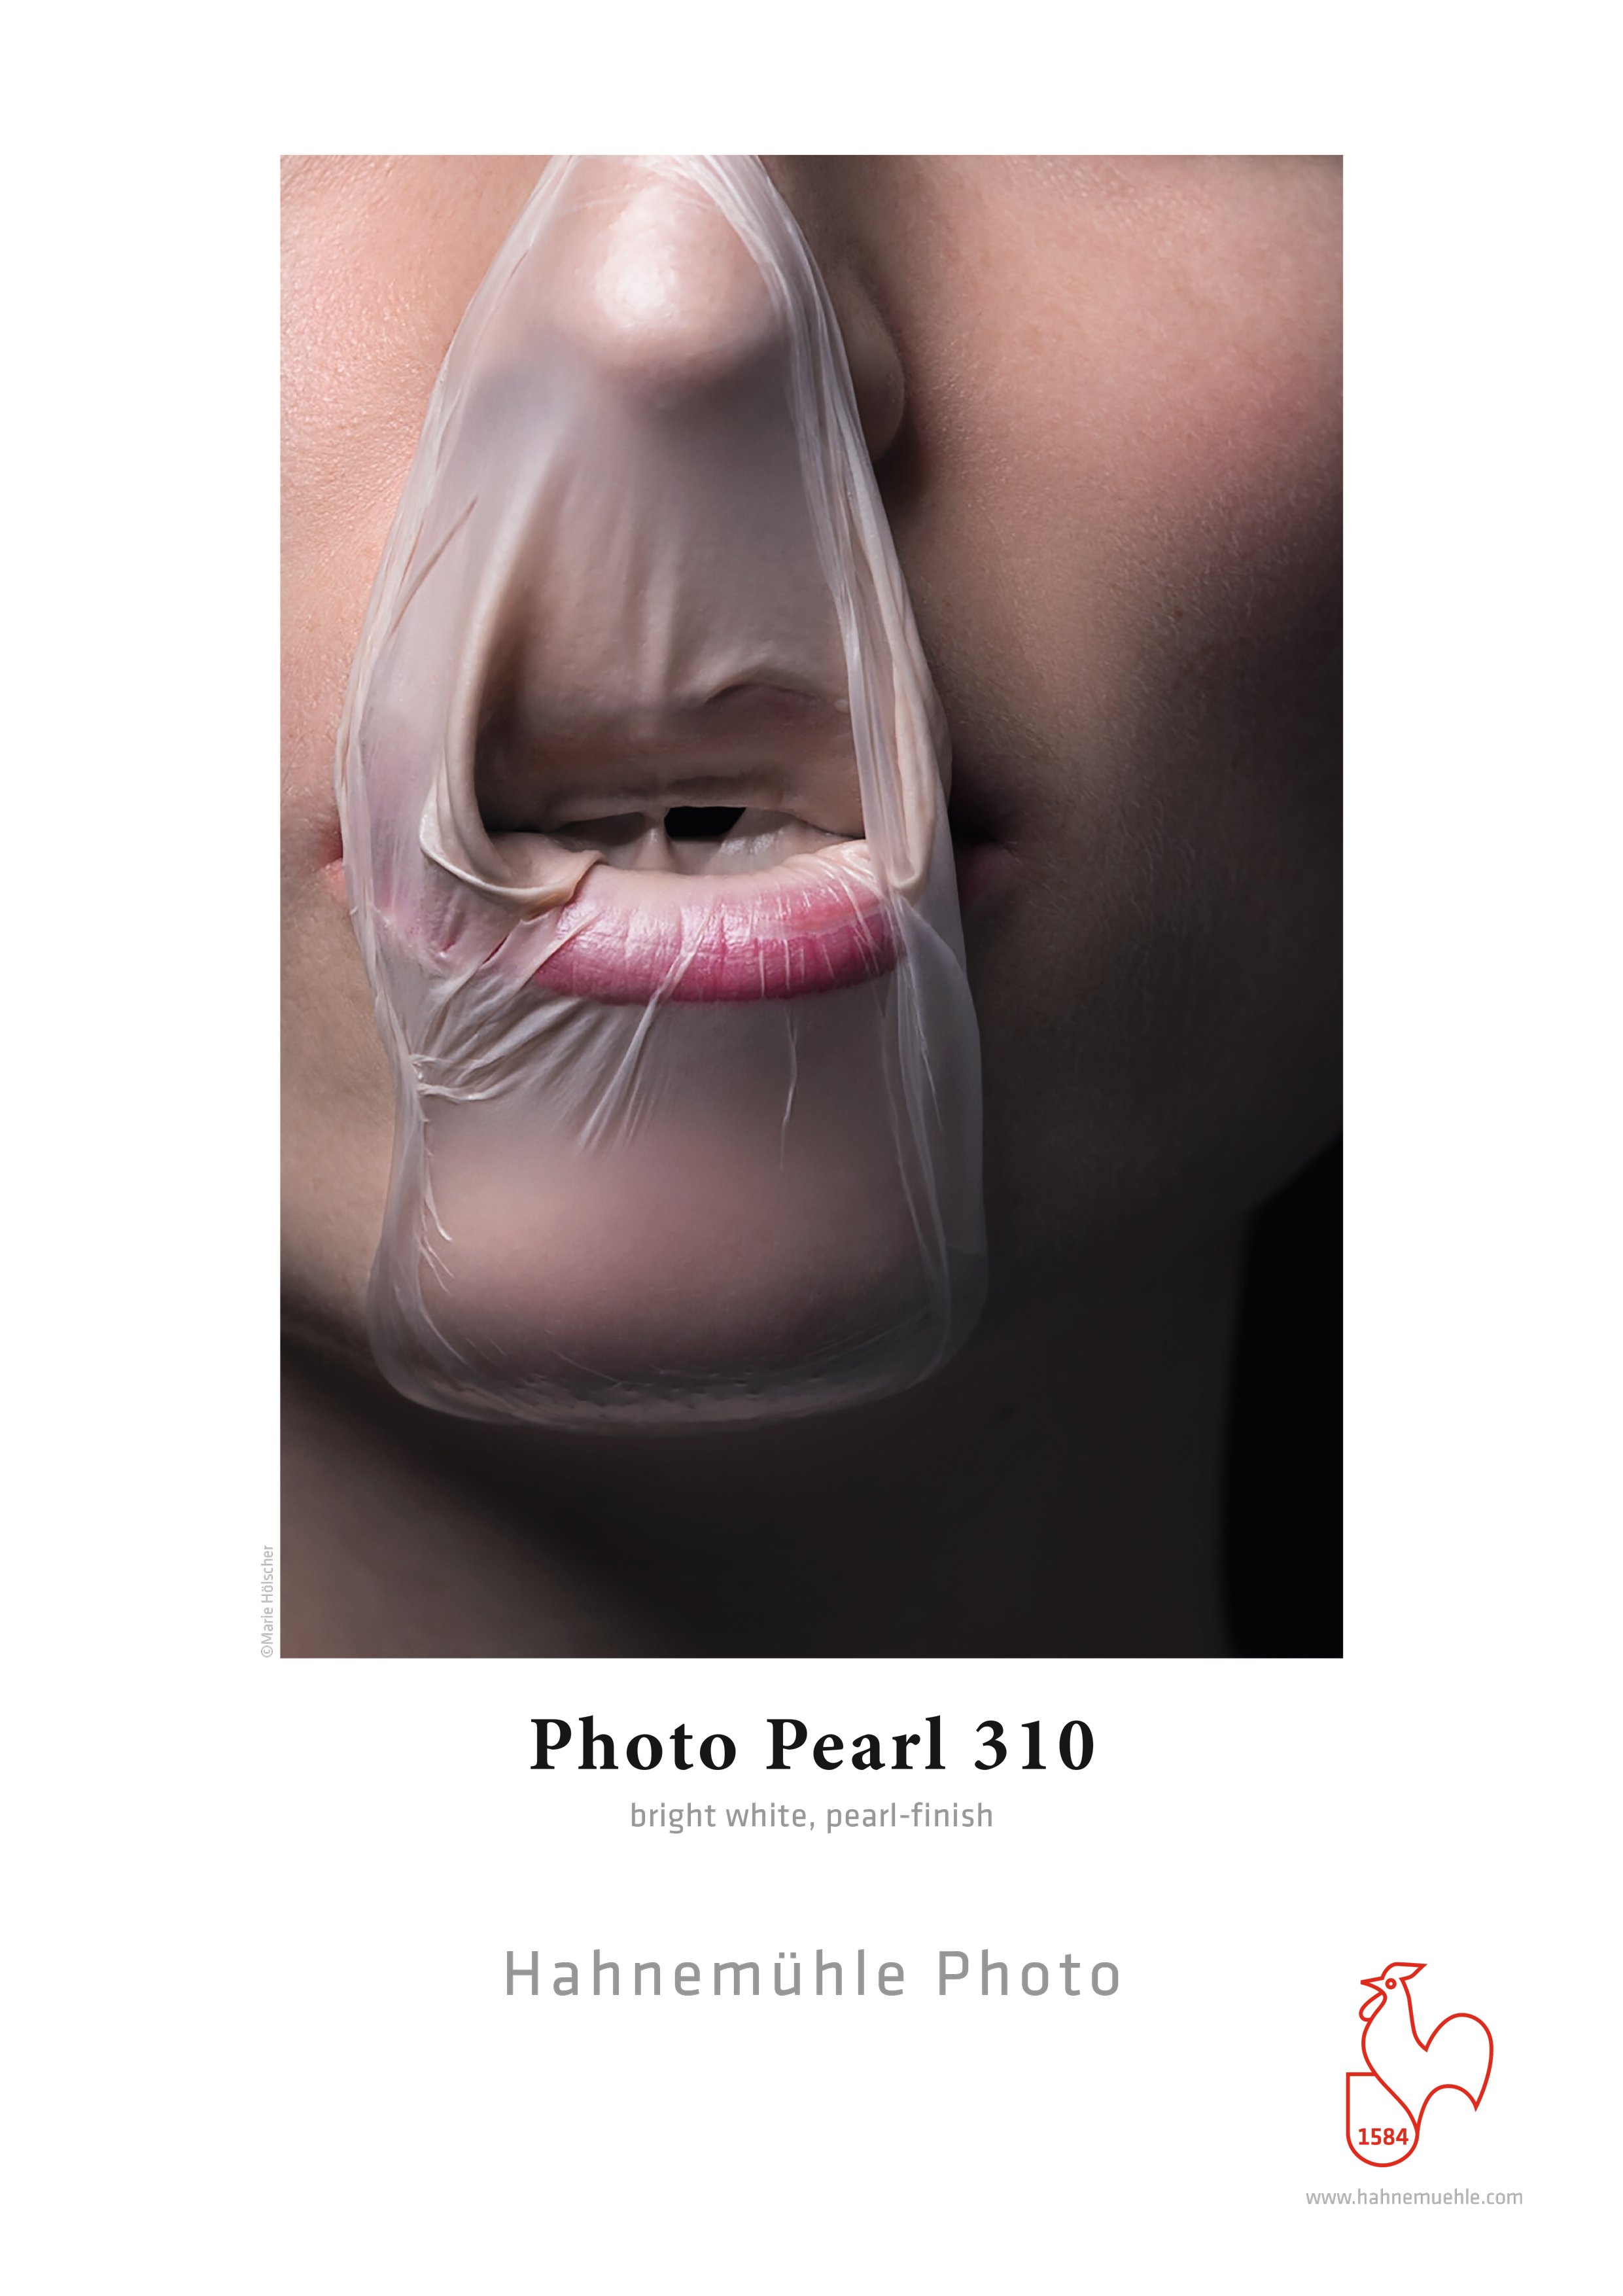 Pattern print with chewing gum around the mouth printed on Hahnemühle Photo Pearl